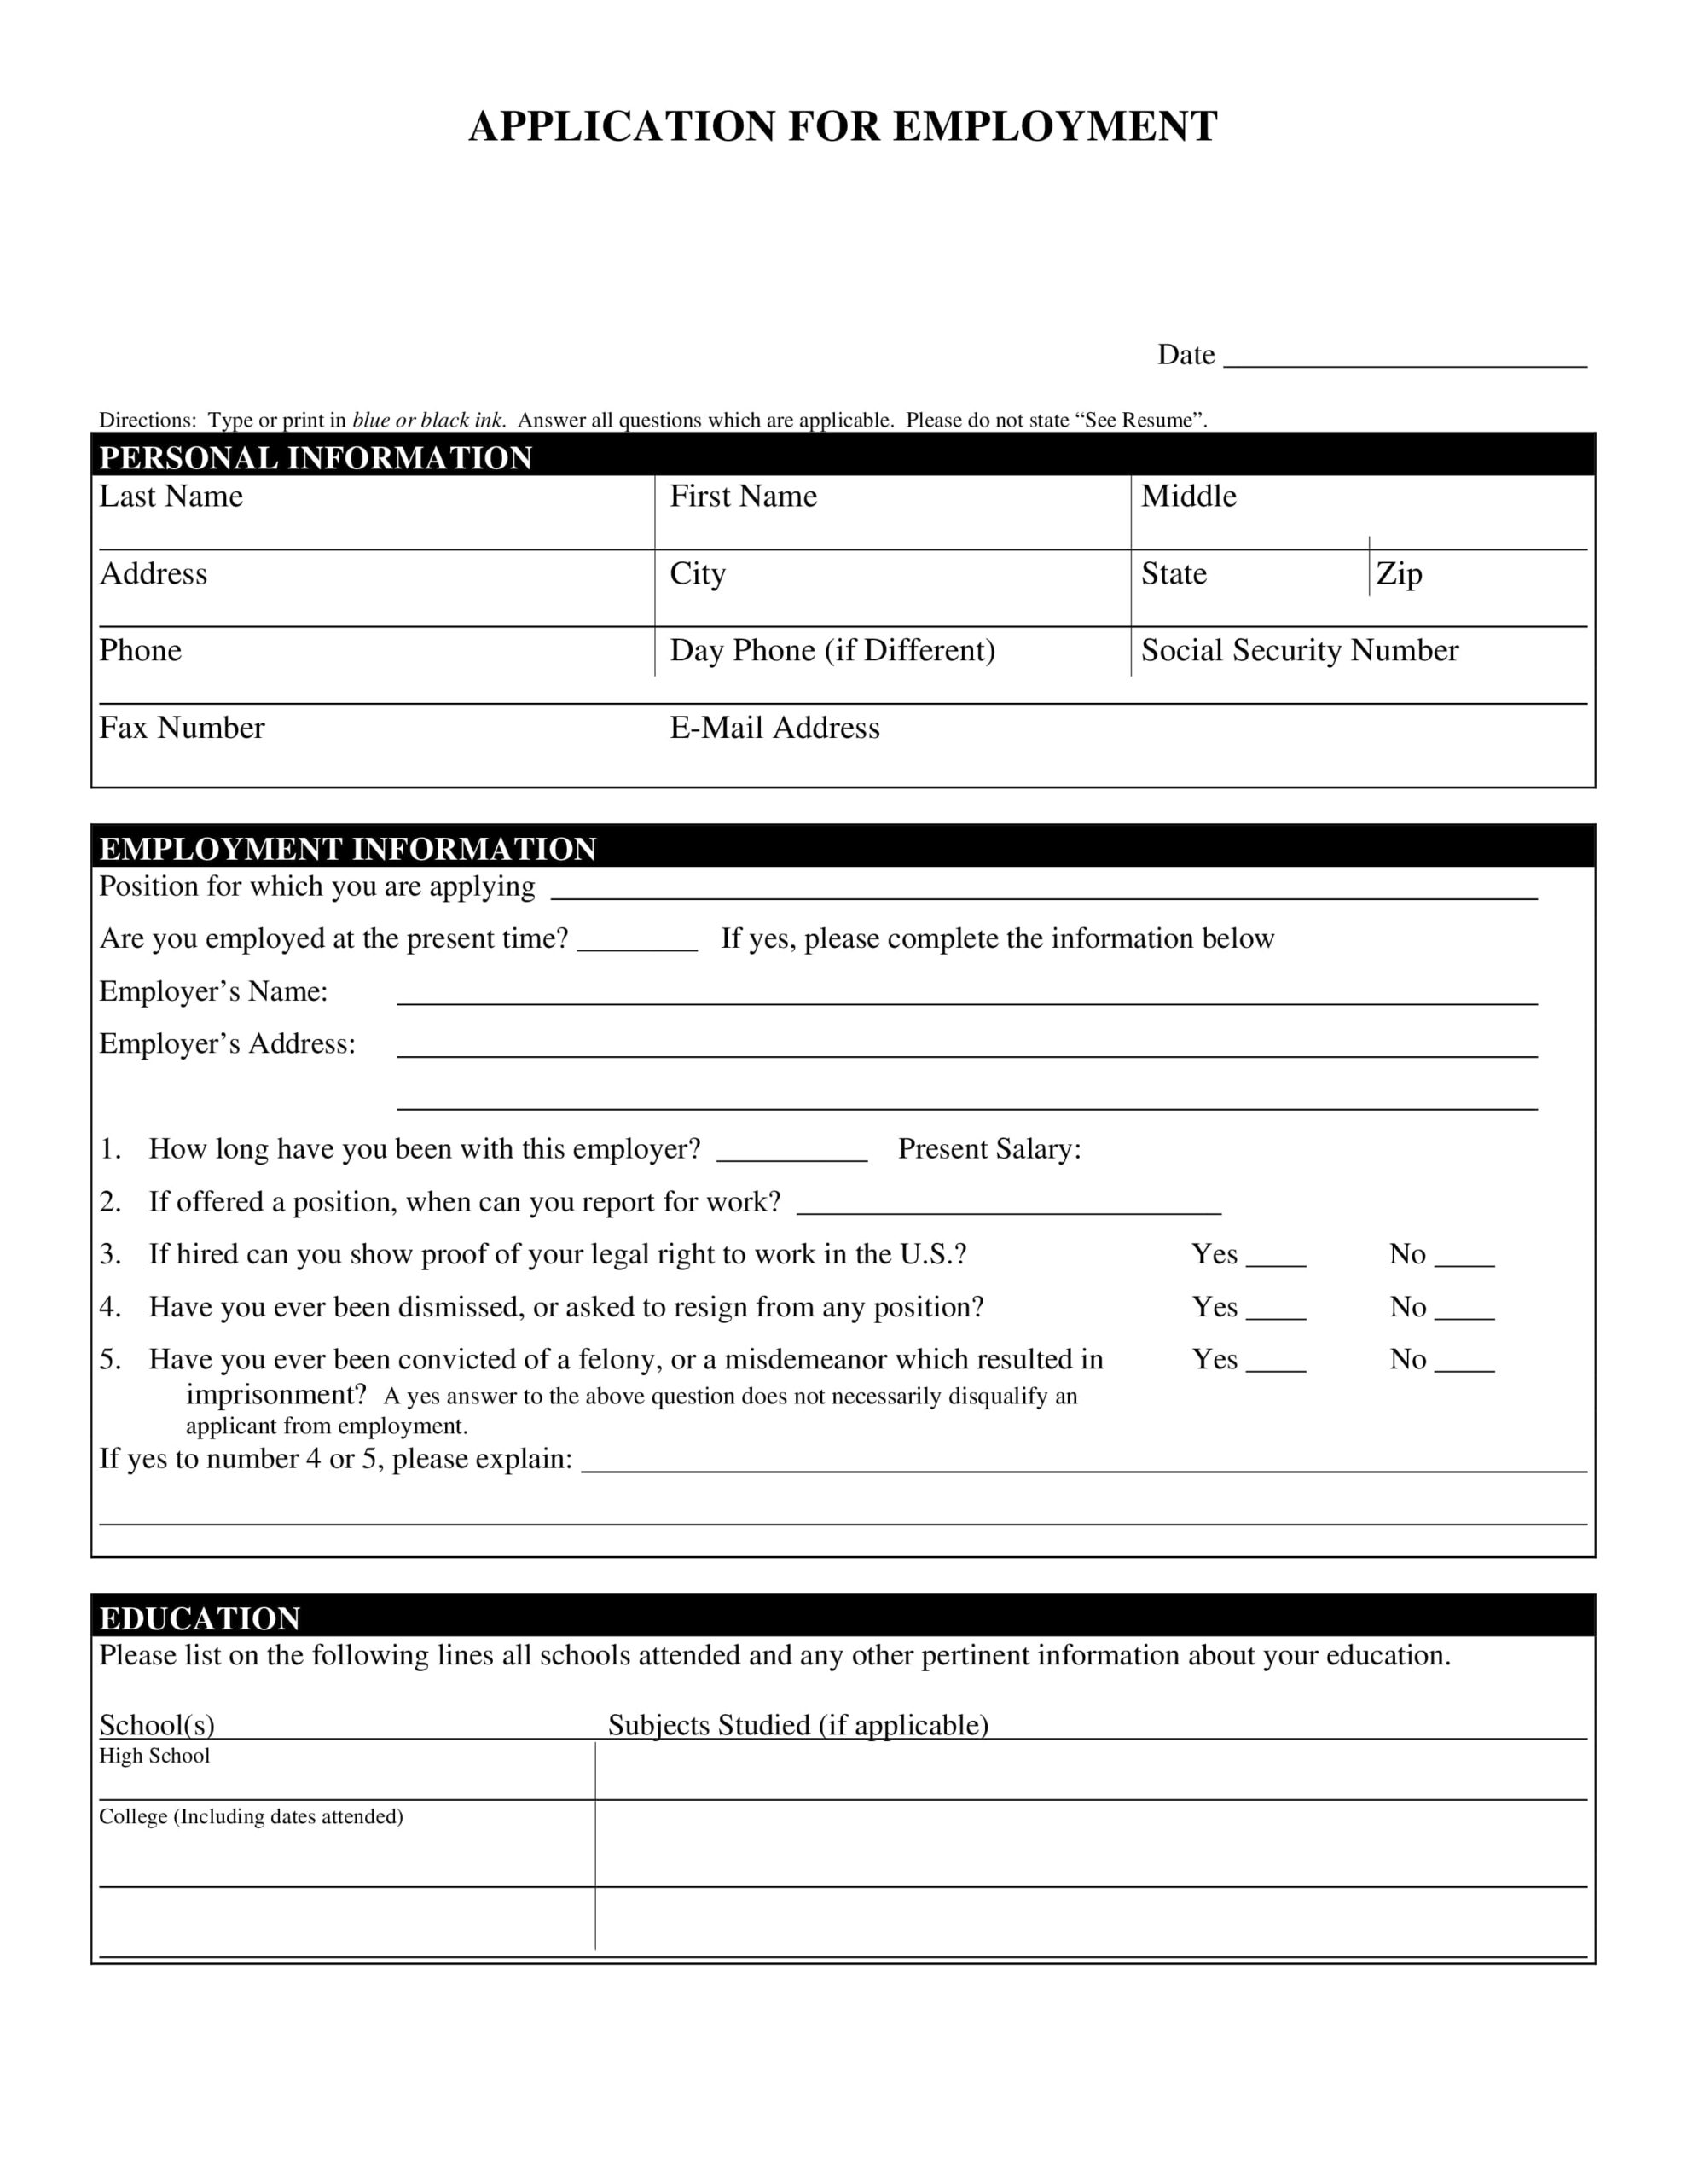 Printable Blank Application For Employment_21993